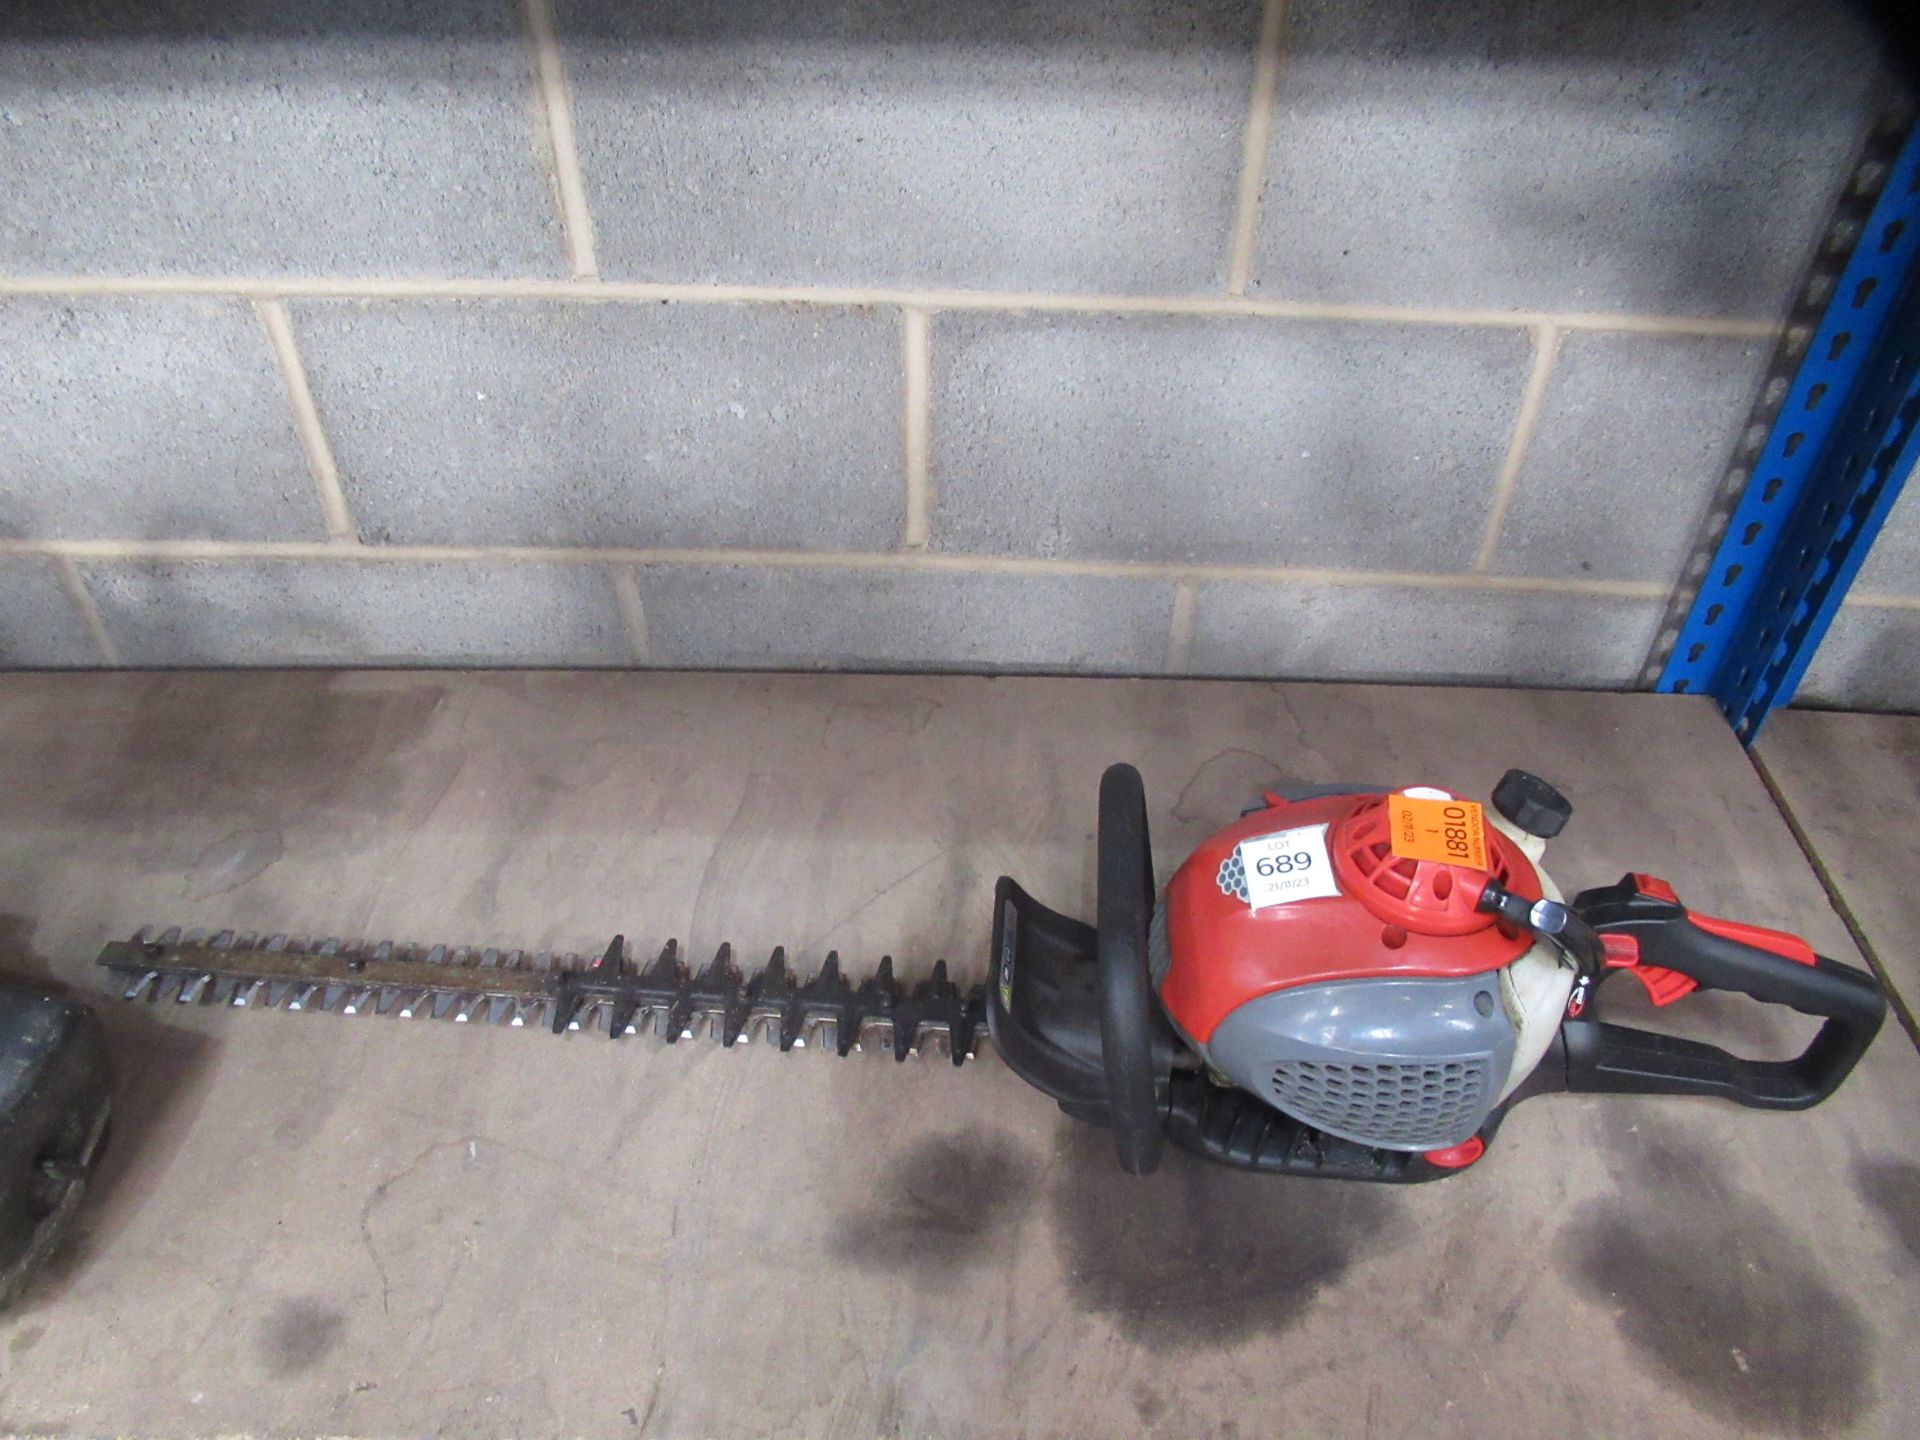 Mitox 600DX Hedge Cutter 'non runner'